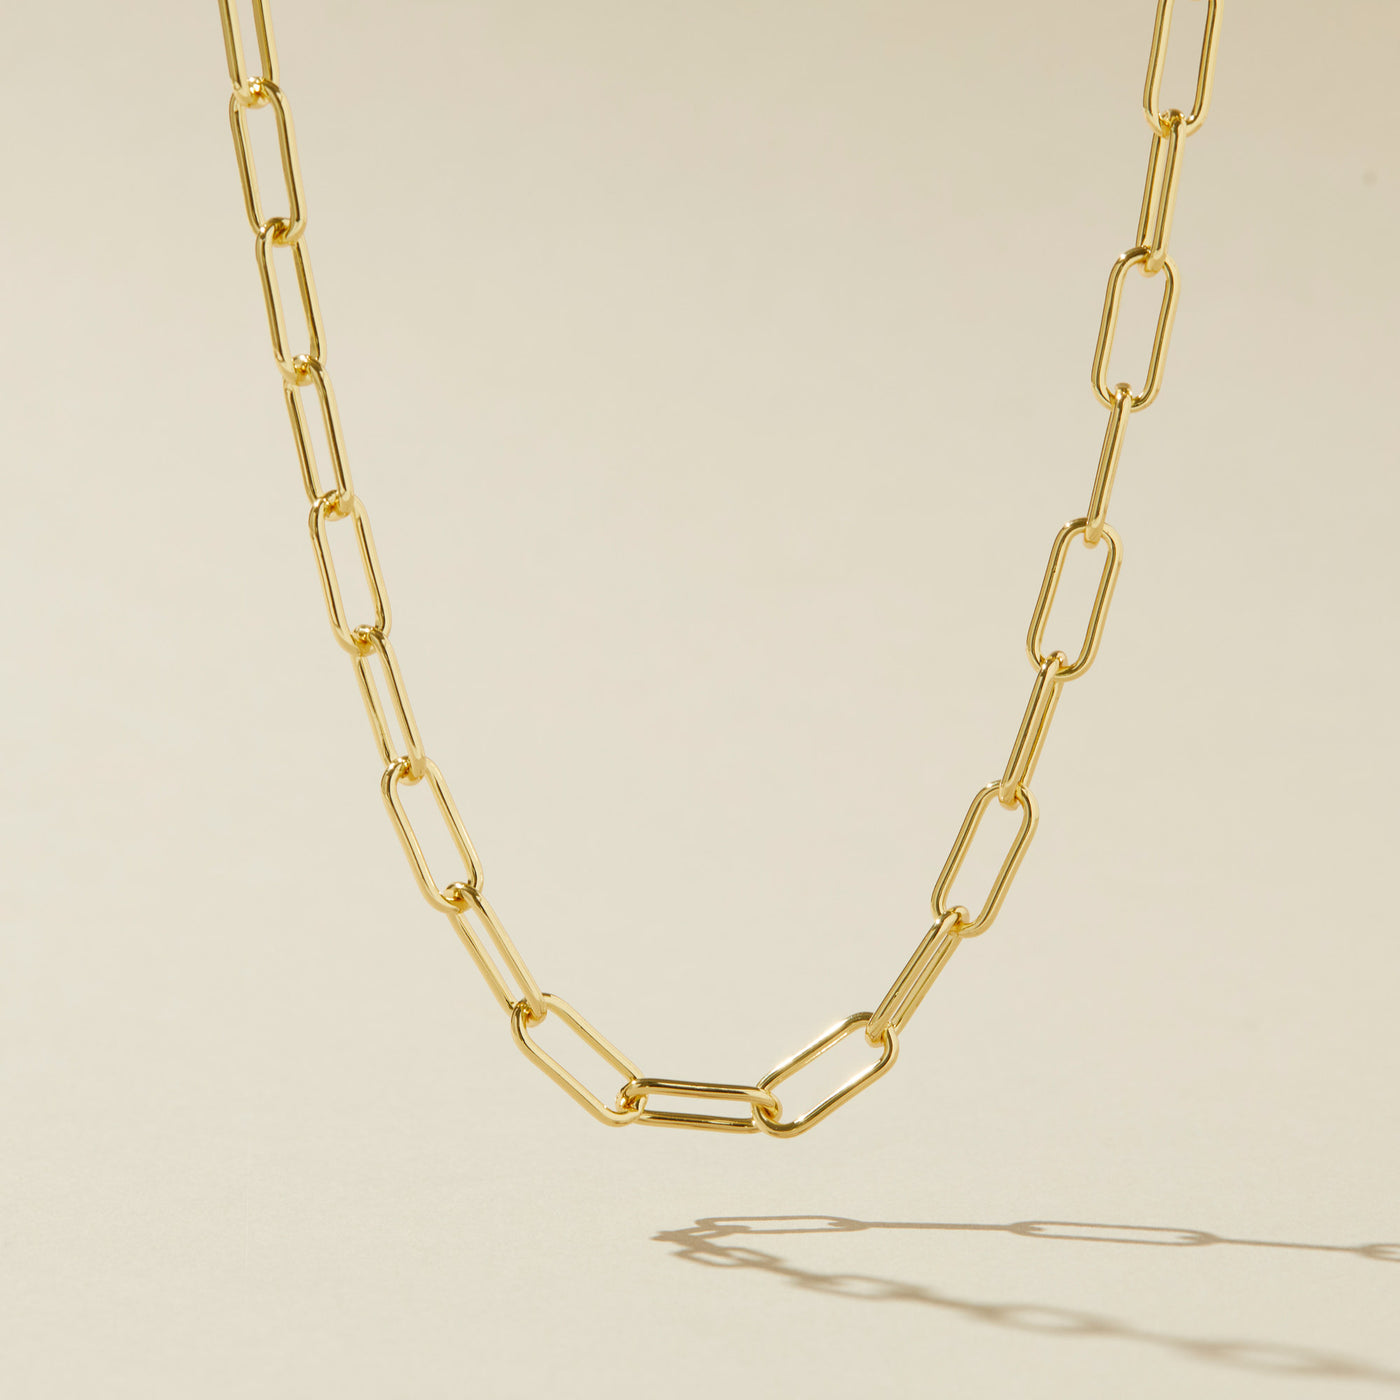 Chunky gold filled chain necklace made in U.S.A.